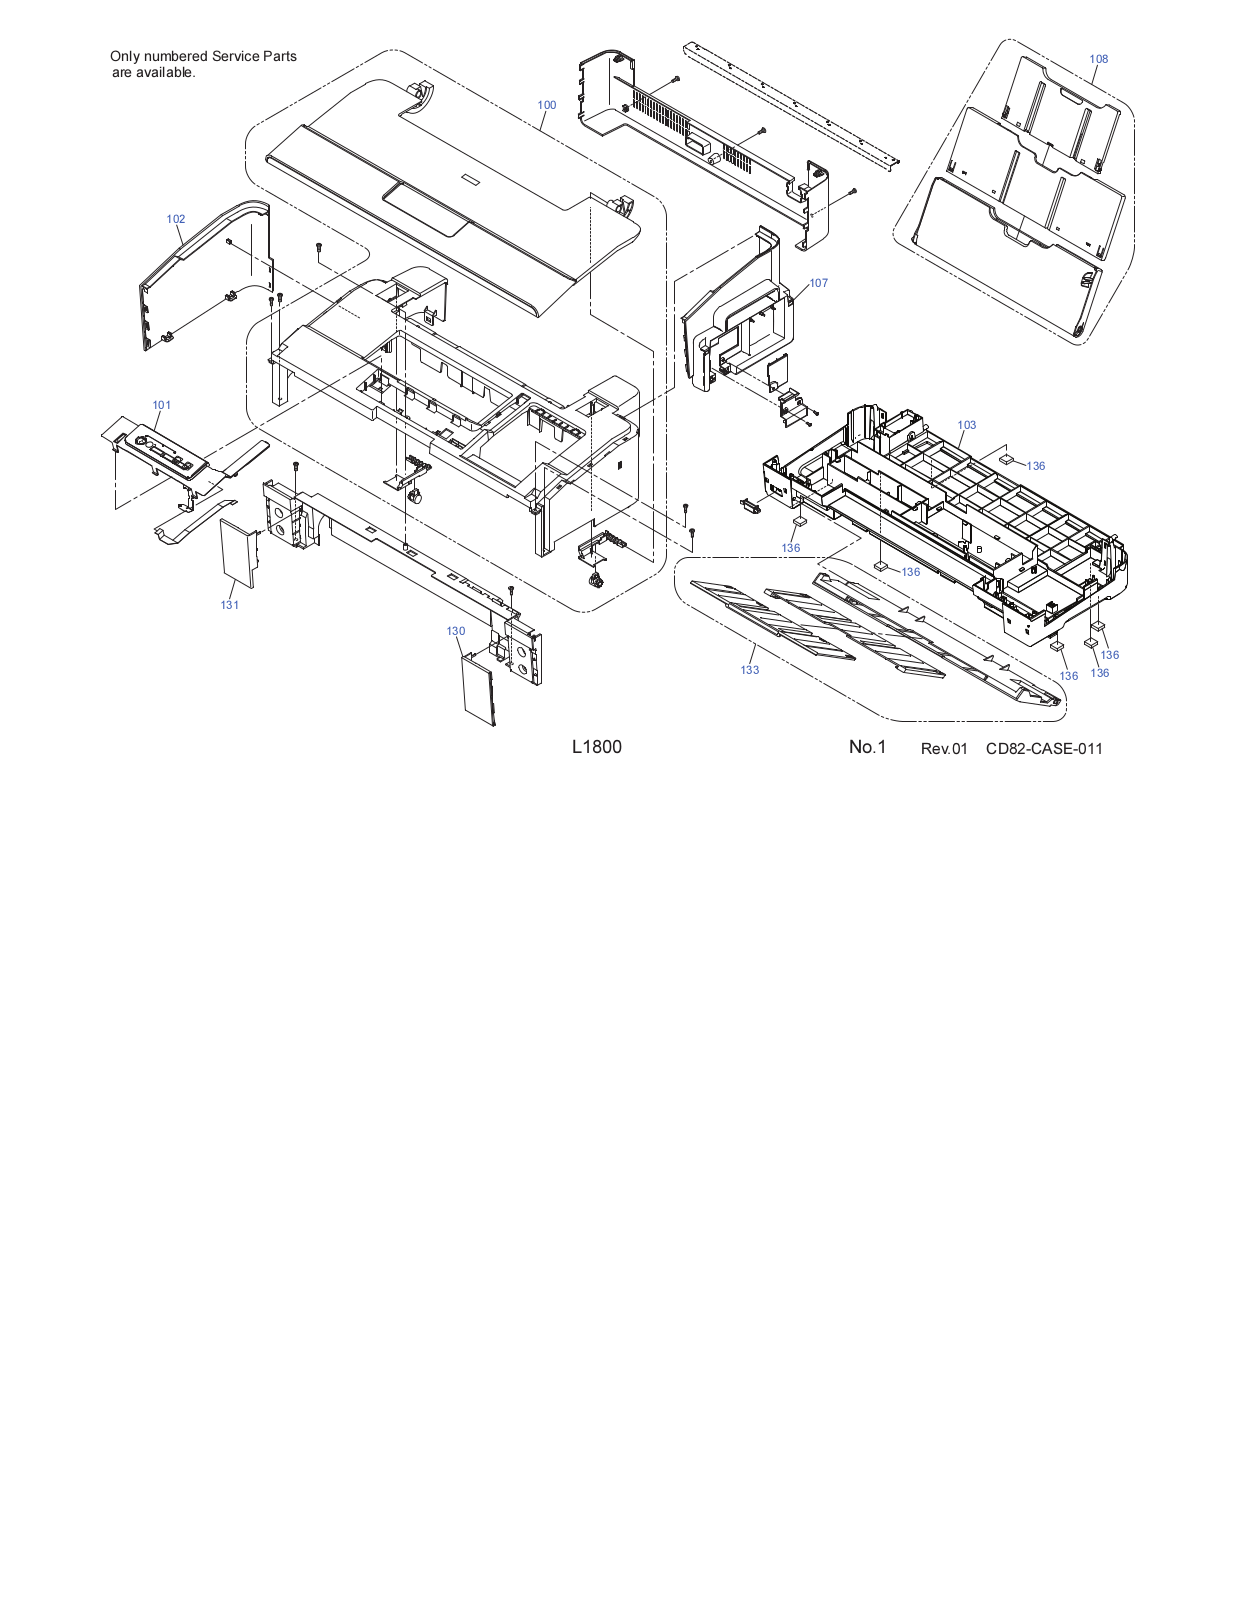 Epson L1800 Exploded Diagrams 2